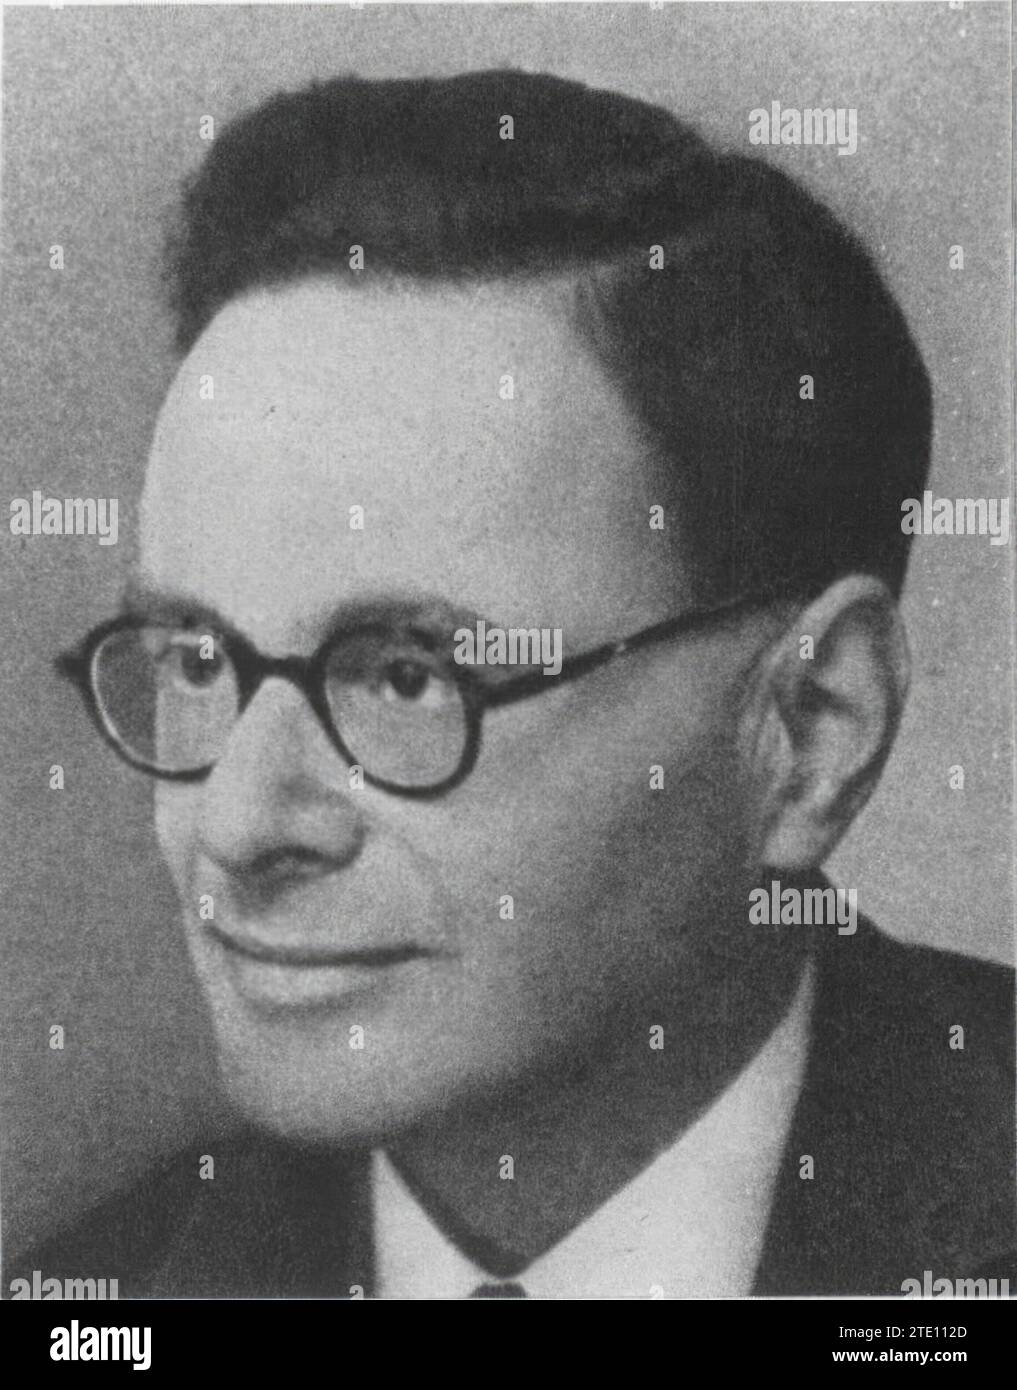 12/31/1929. In the Image, Hans A. Krebs, Nobel Prize winner in medicine in 1953. Naturalized English, Jewish by Birth, Escaped Hitler's Persecutions. Credit: Album / Archivo ABC Stock Photo